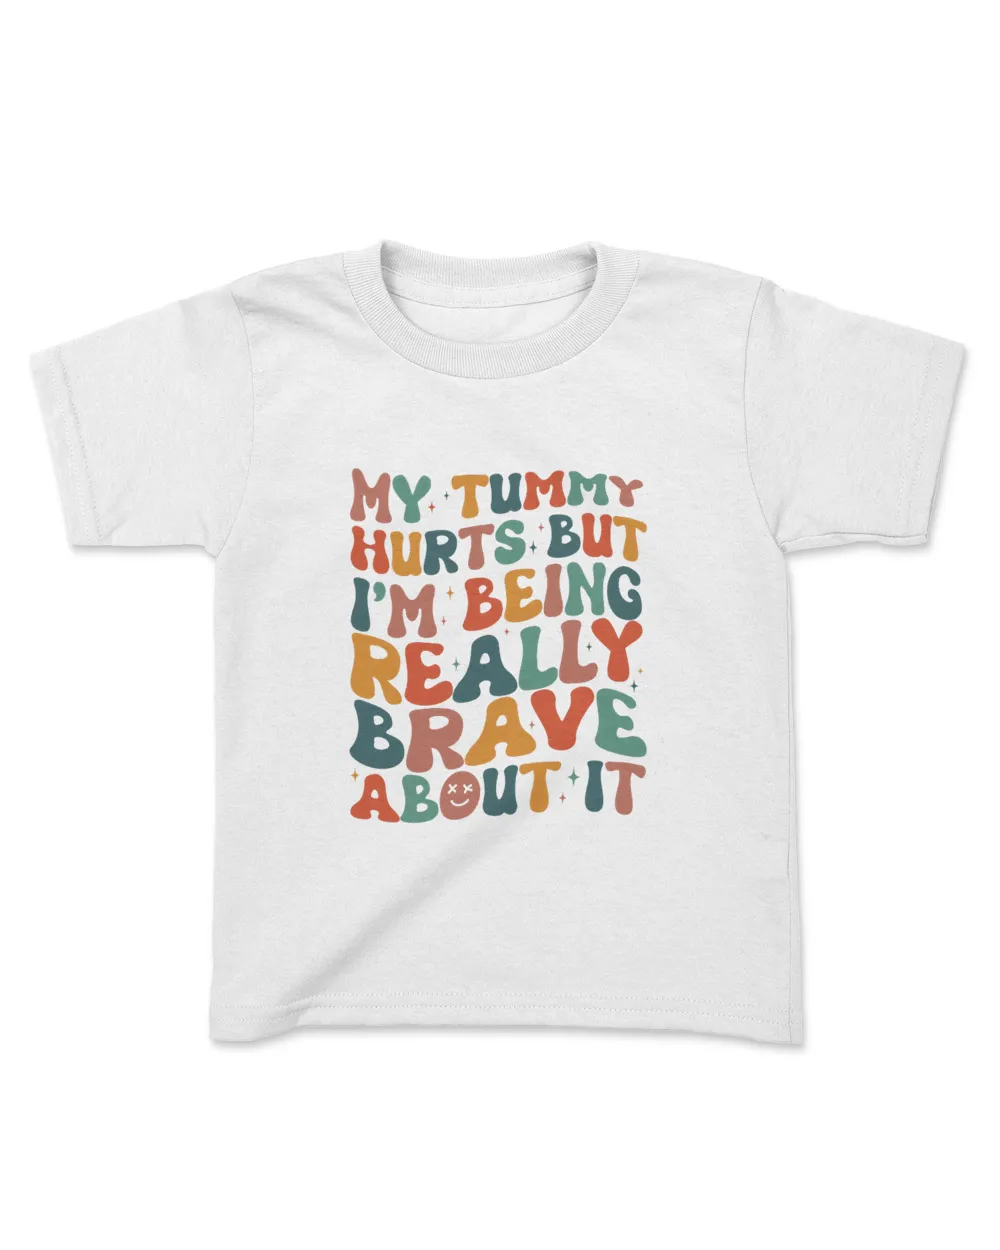 My Tummy Hurts But I'm Being Really Brave About It Sweatshirt, Hoodie, Tote bag, Canvas